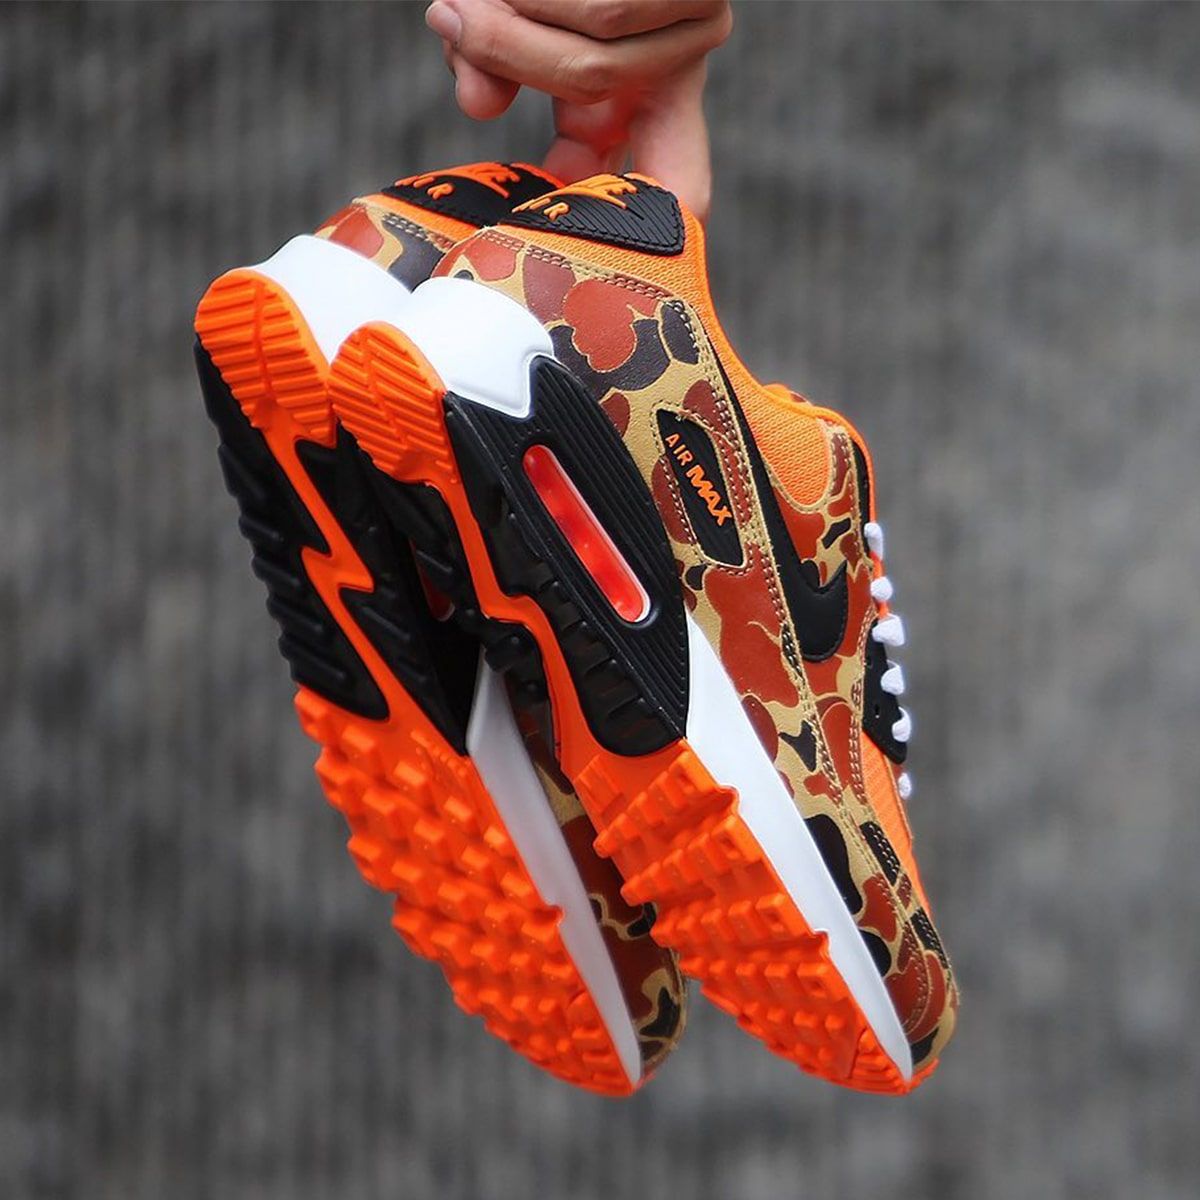 Where to Buy the Nike Air Max 90 “Orange Duck Camo” | House of Heat°